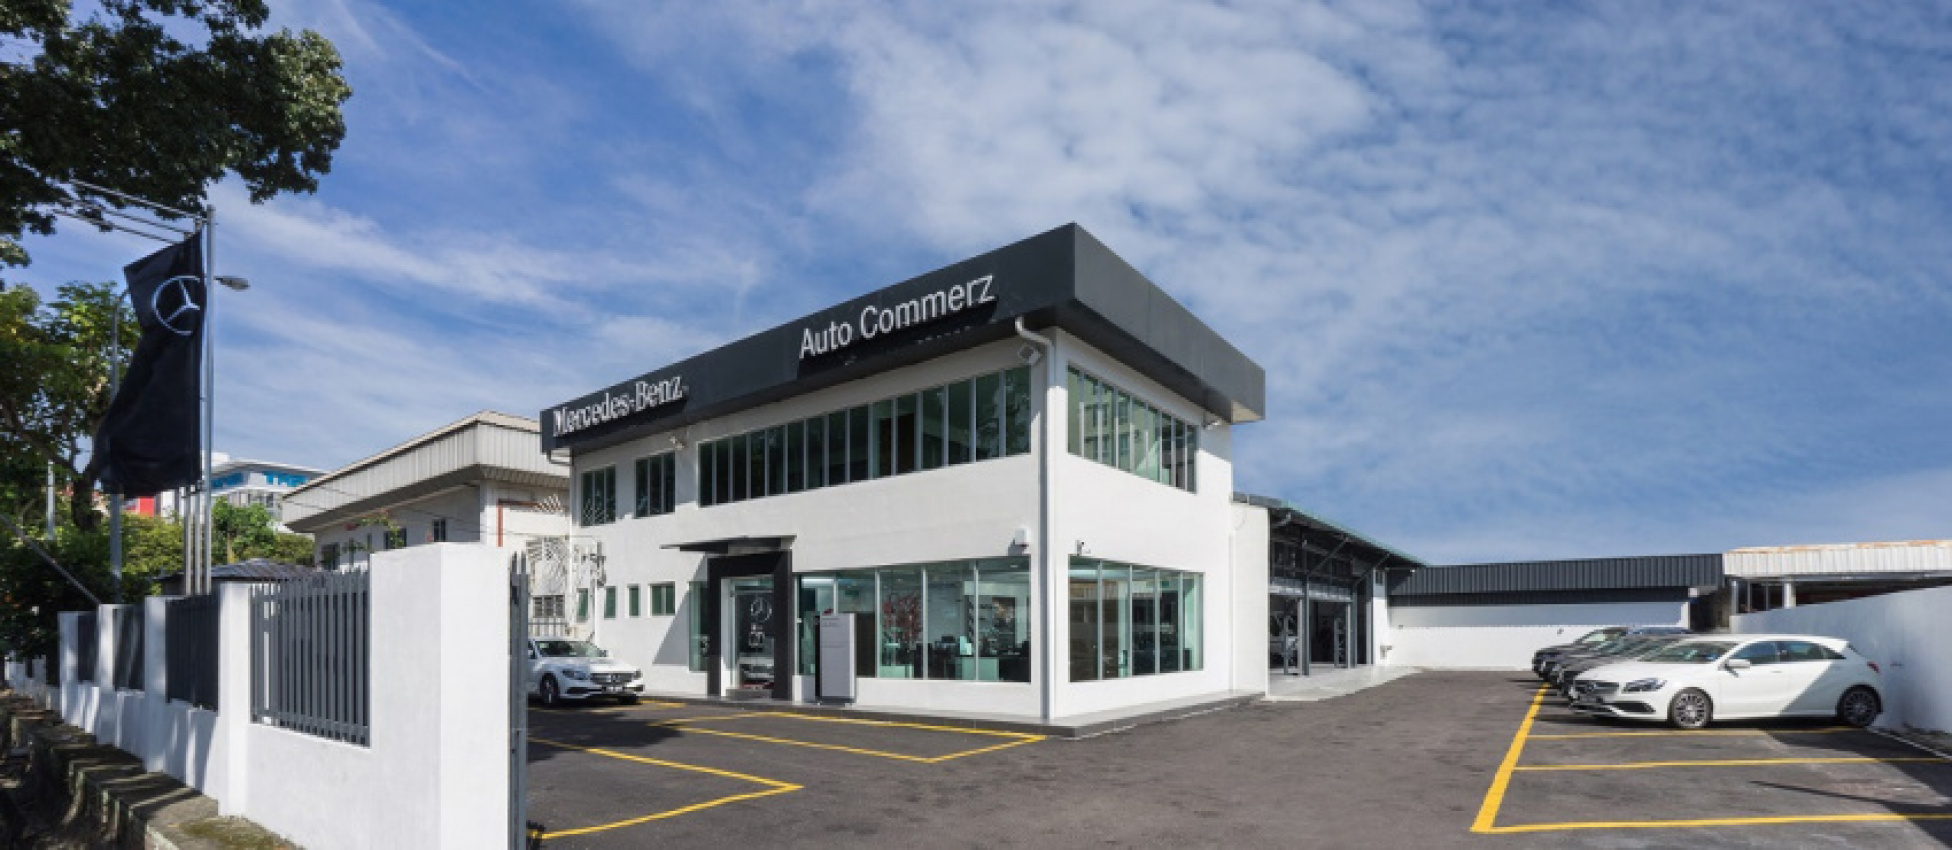 autos, car brands, cars, mercedes-benz, auto commerz, mercedes, service centre, auto commerz 2s centre ready to serve mercedes-benz owners in northeast kuala lumpur